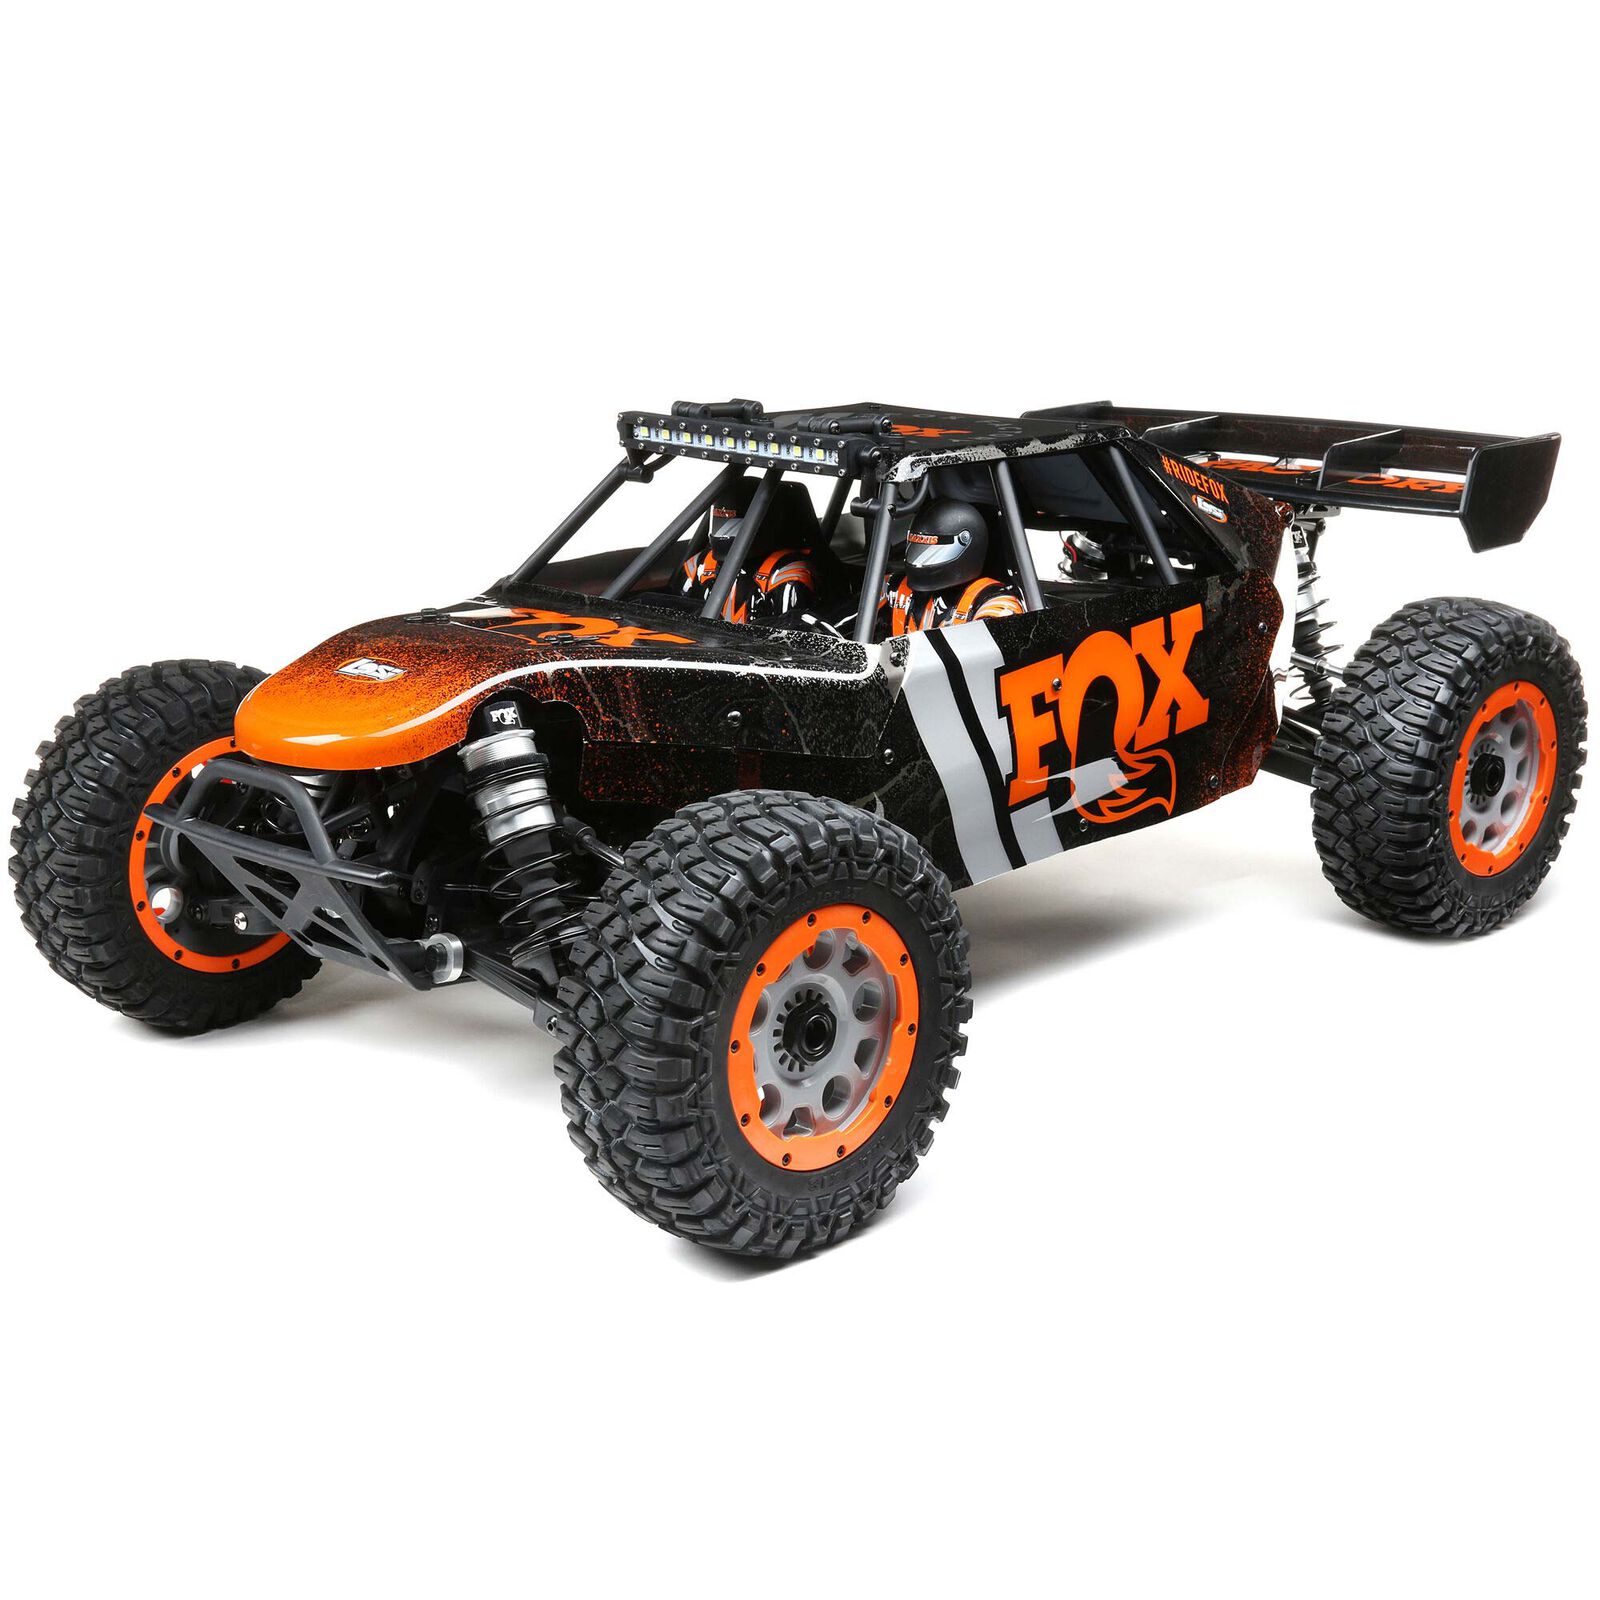 Losi LOS05020V2T1 - 1/5 DBXL-E 2.0 4WD Desert Buggy Brushless RTR with Smart, Fox